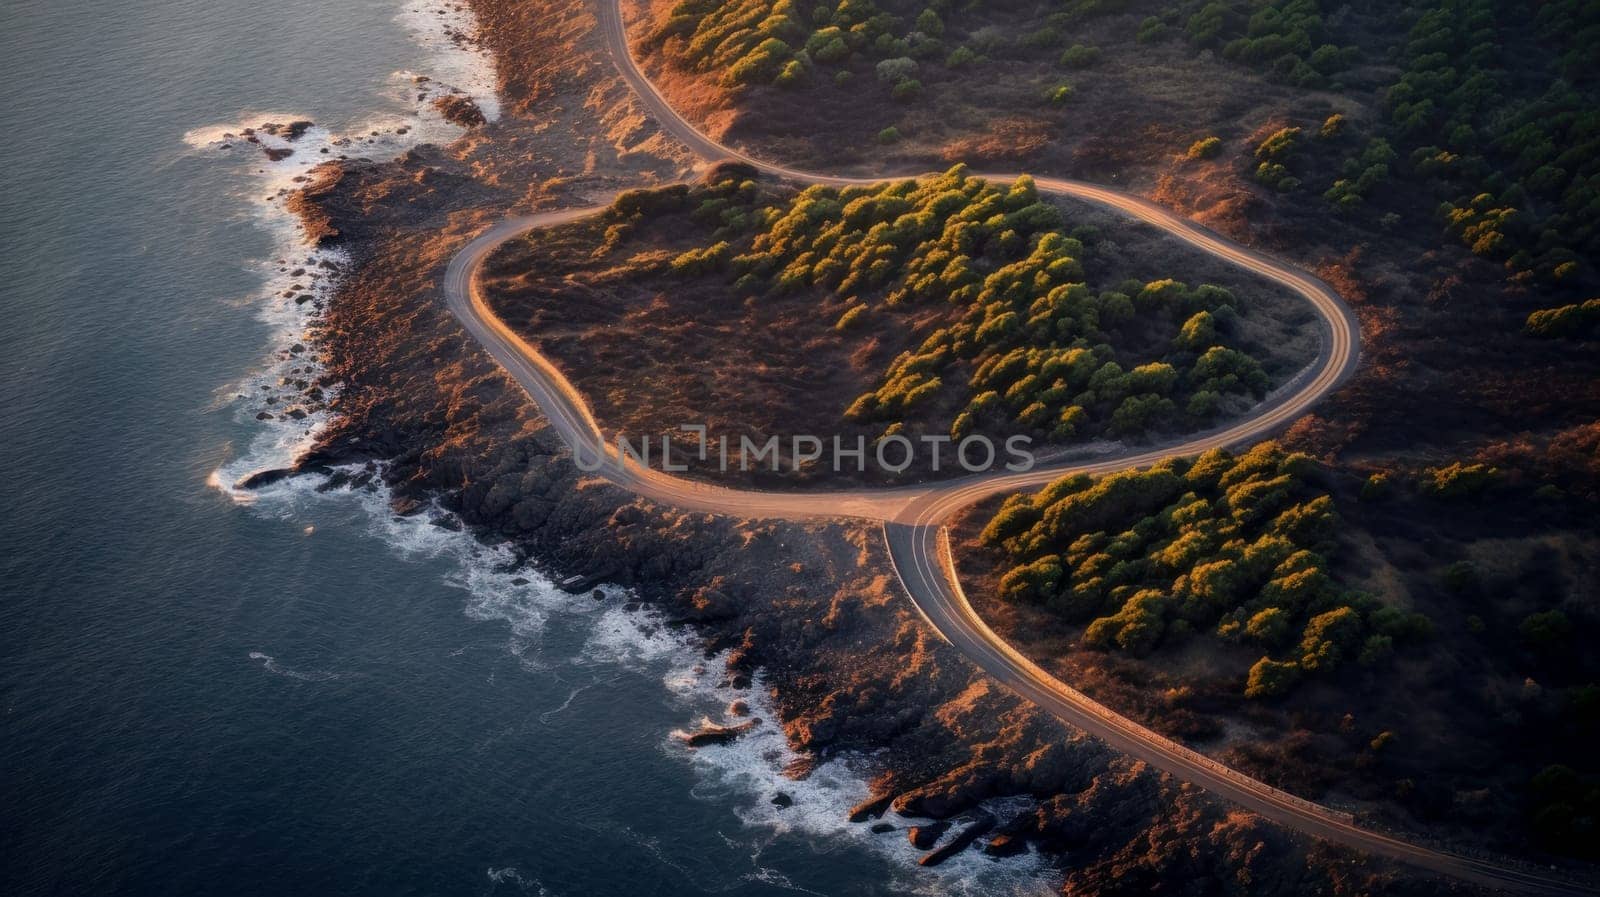 Automobile road among the forest, sea and rocks. Beautiful landscape, picture, phone screensaver, copy space, advertising, travel agency, tourism, solitude with nature, without people